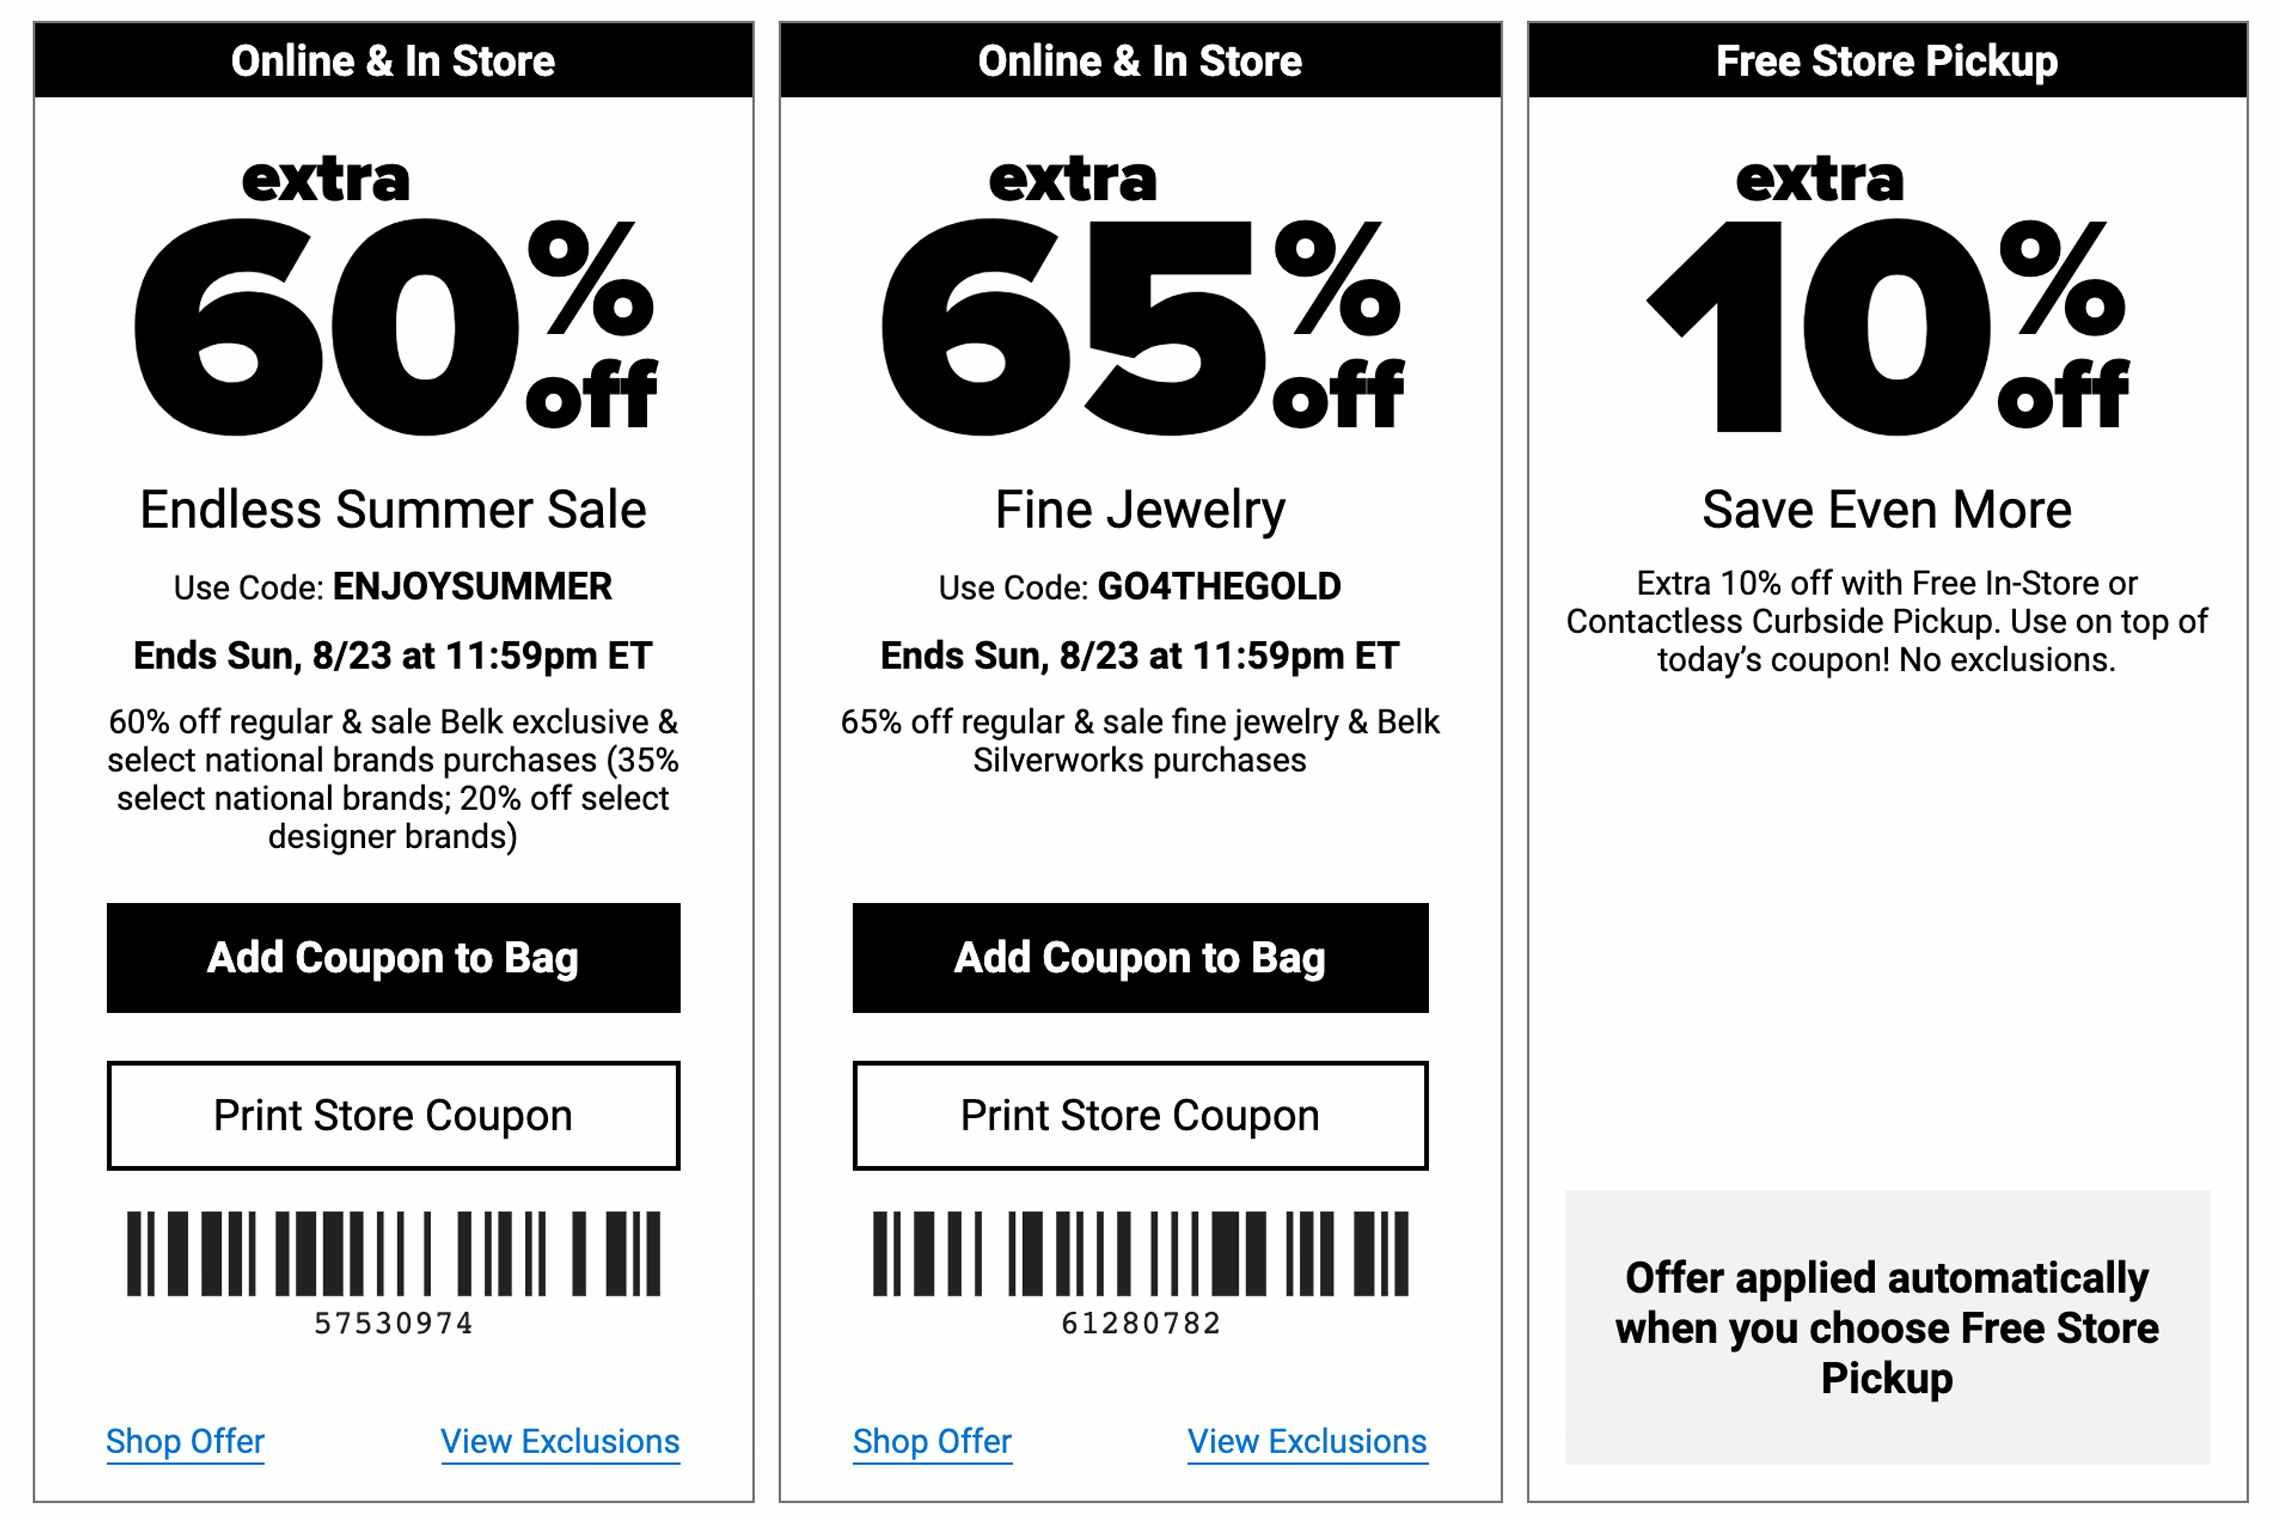 Kohl's 20% off Coupon (good in-store & online) No exclusions 